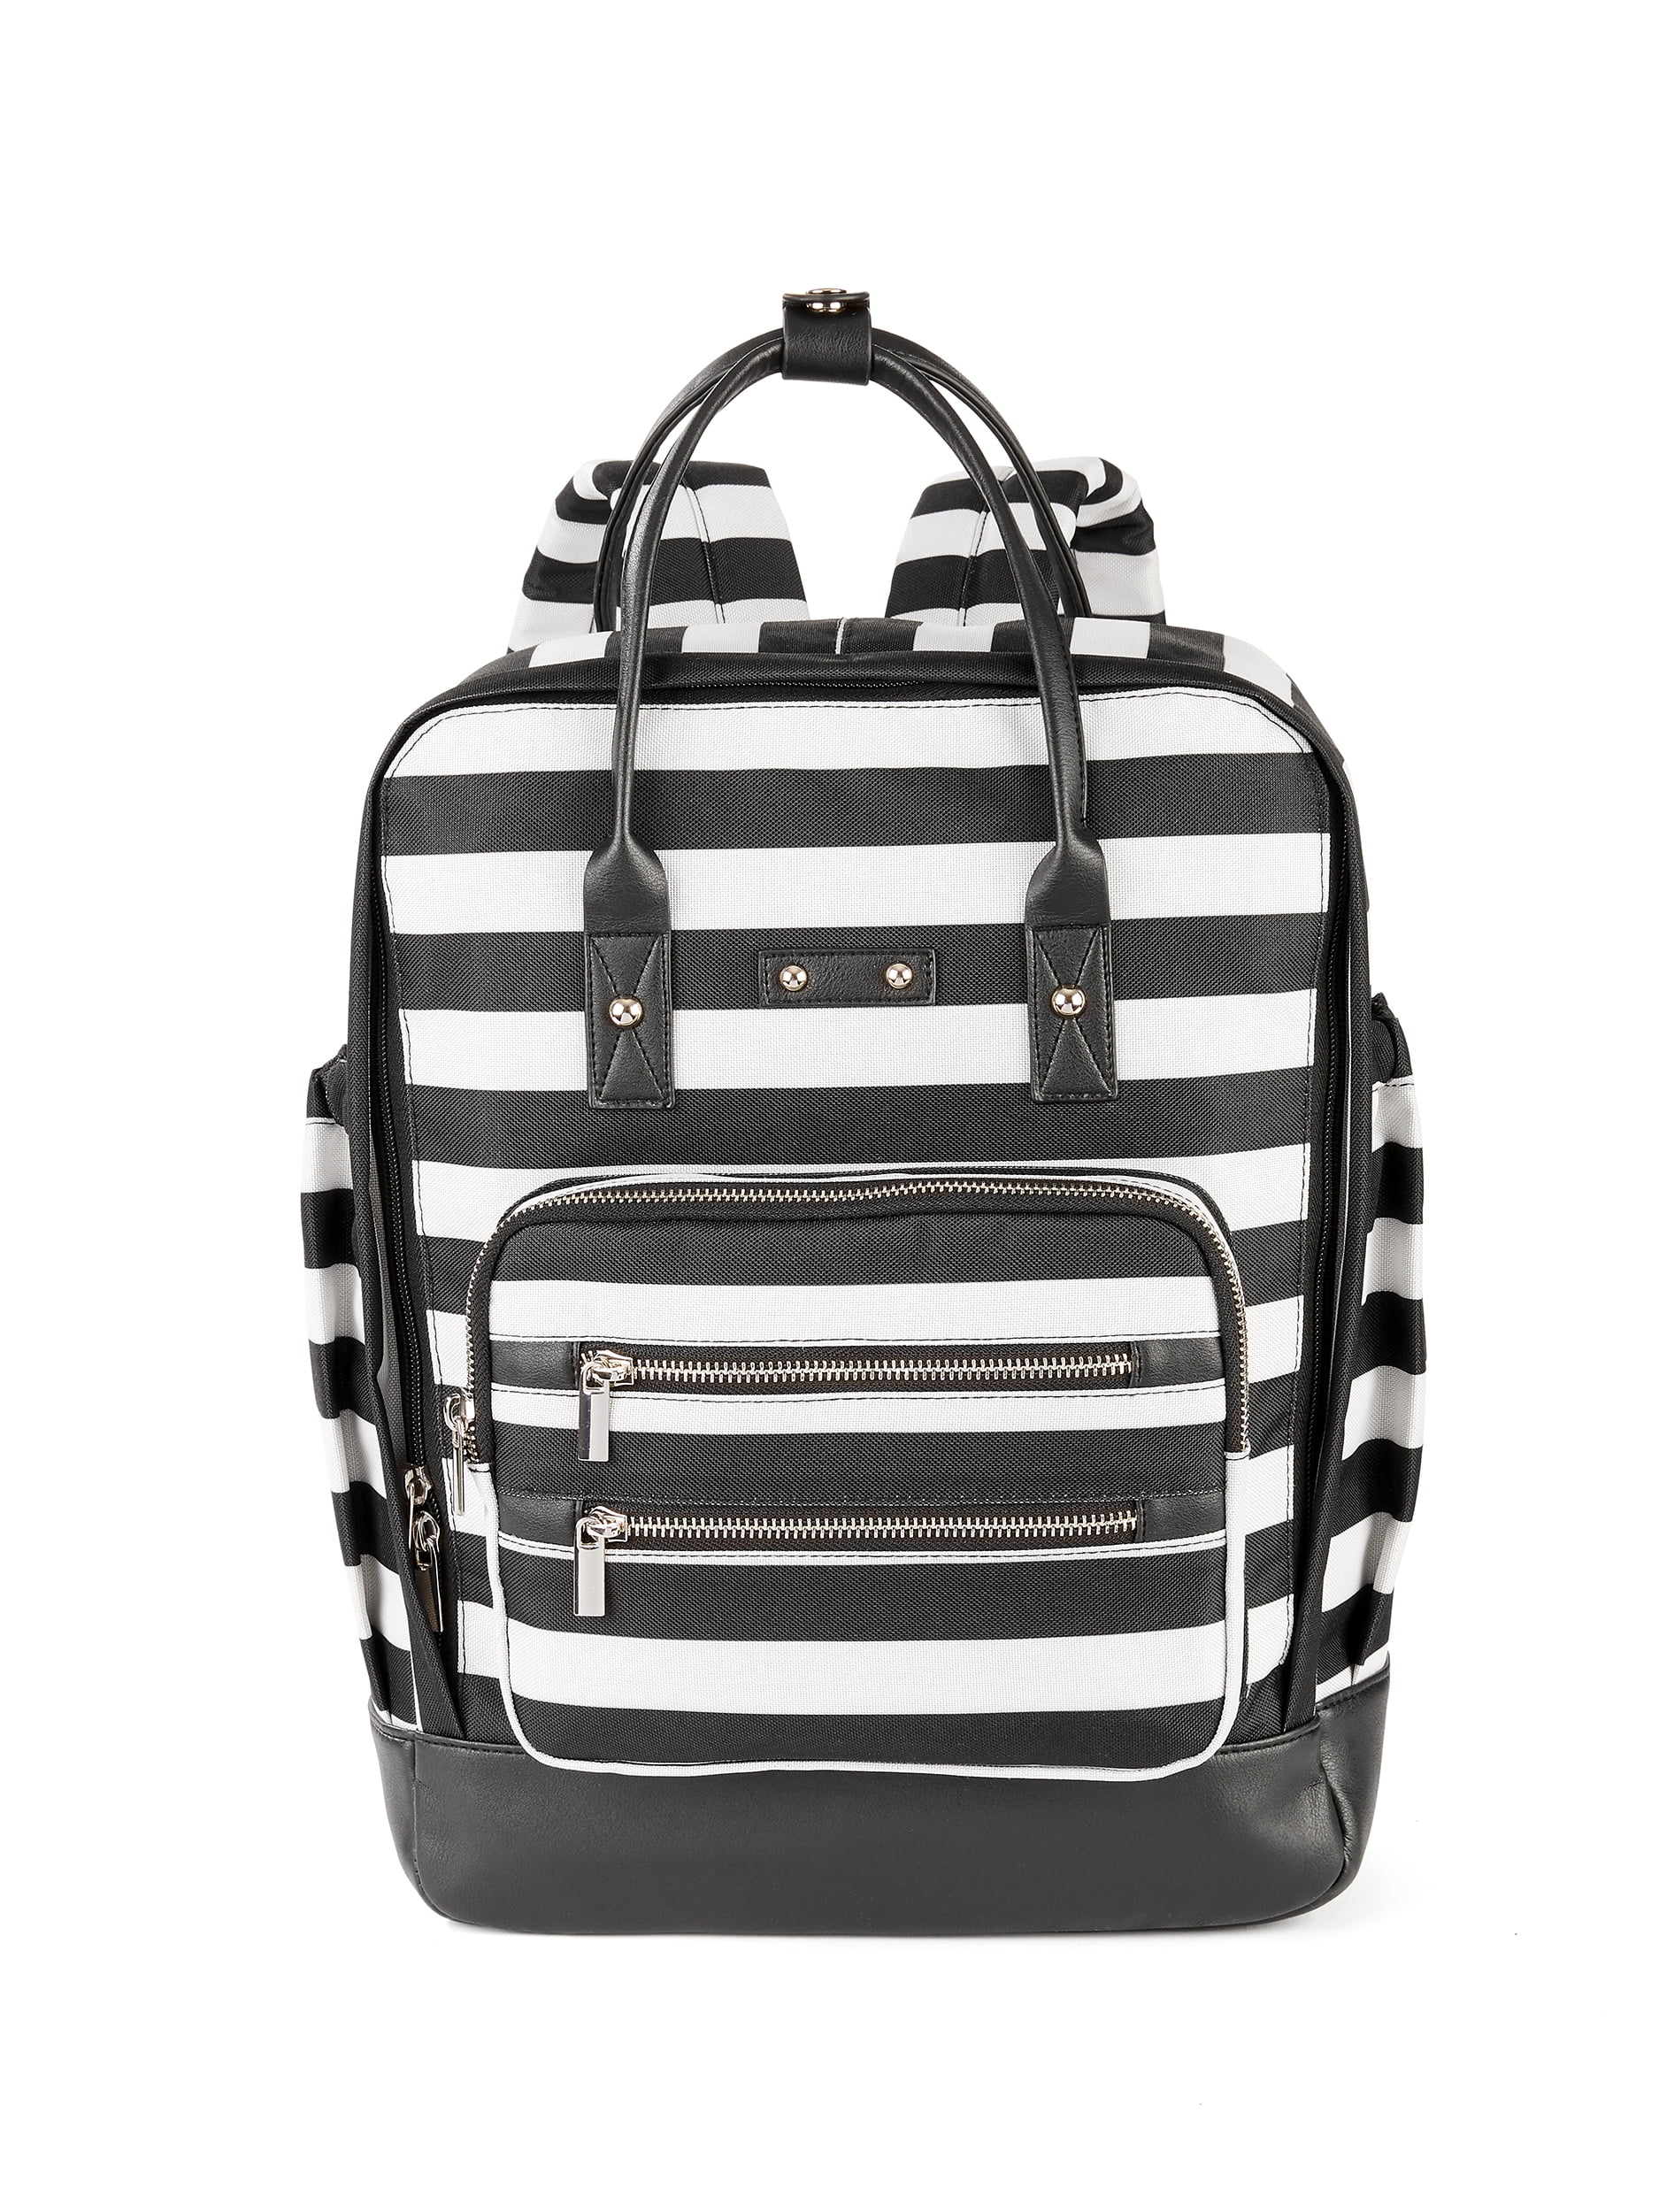 black and white striped backpack